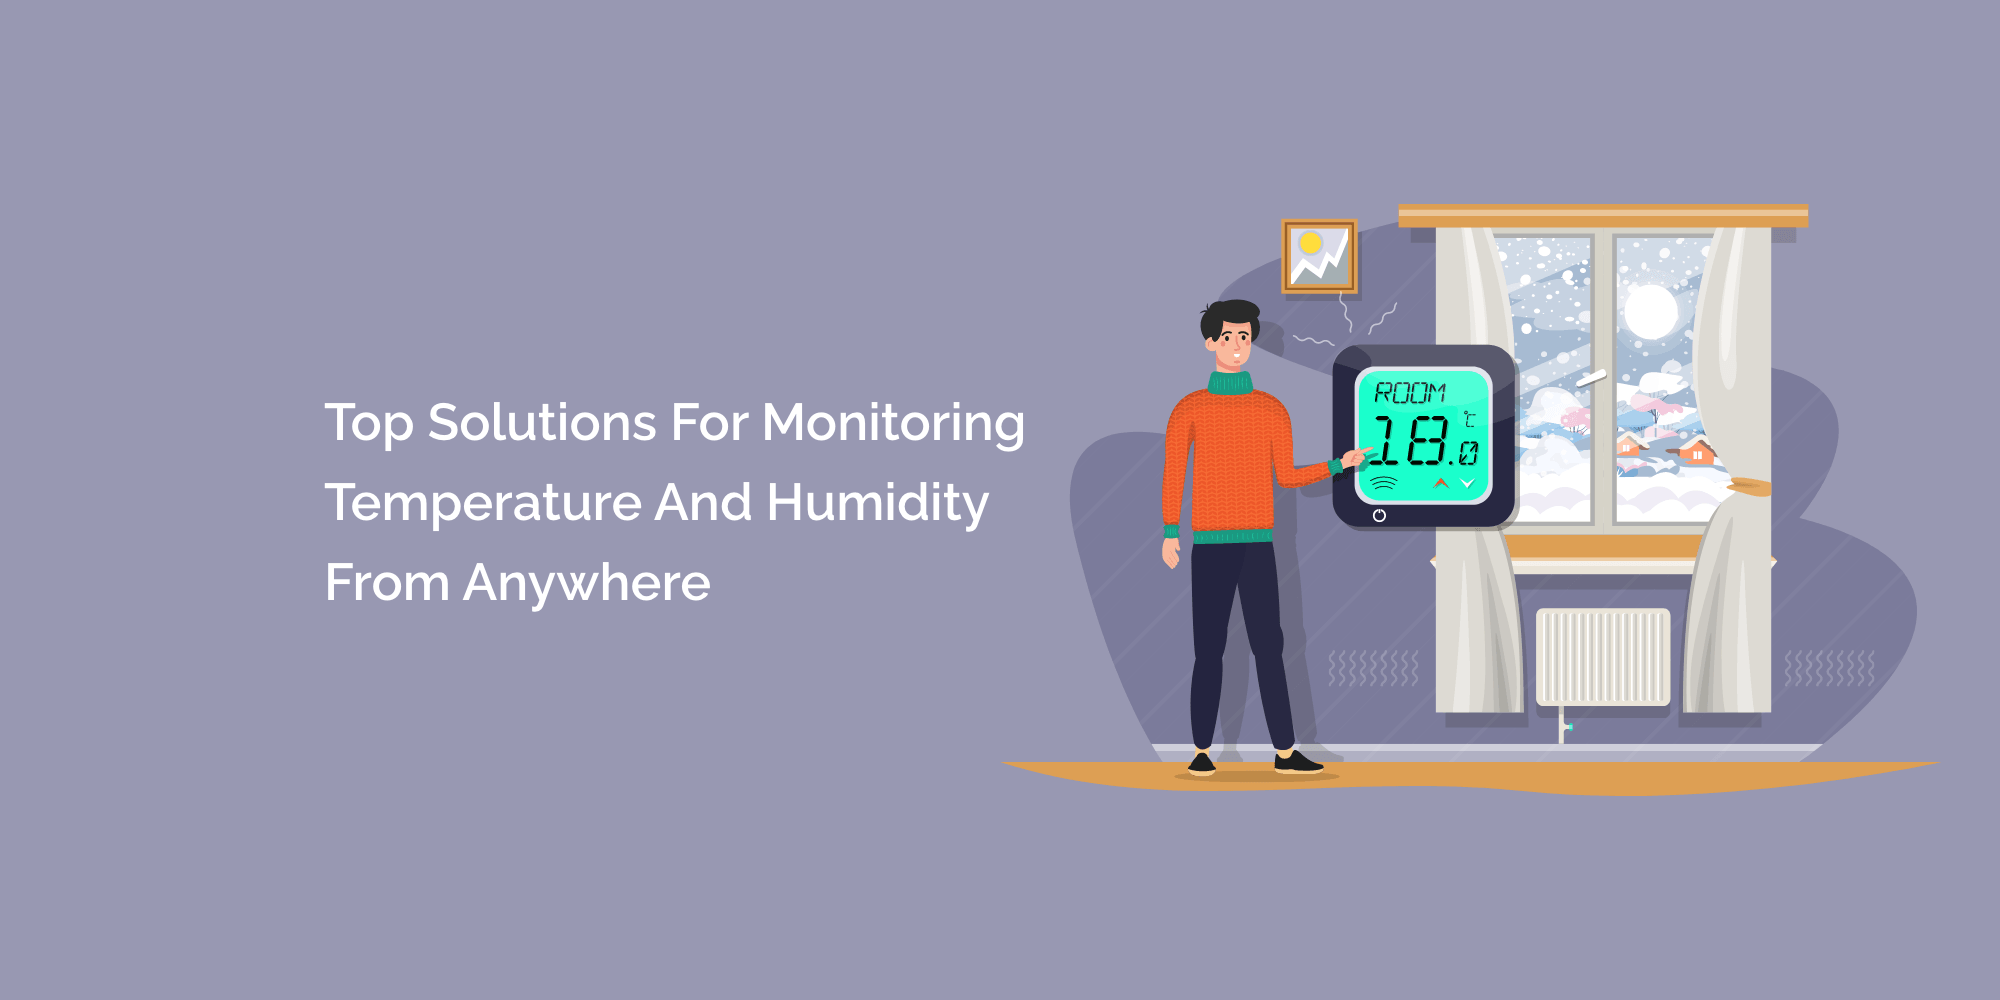 Top Solutions for Monitoring Temperature and Humidity from Anywhere